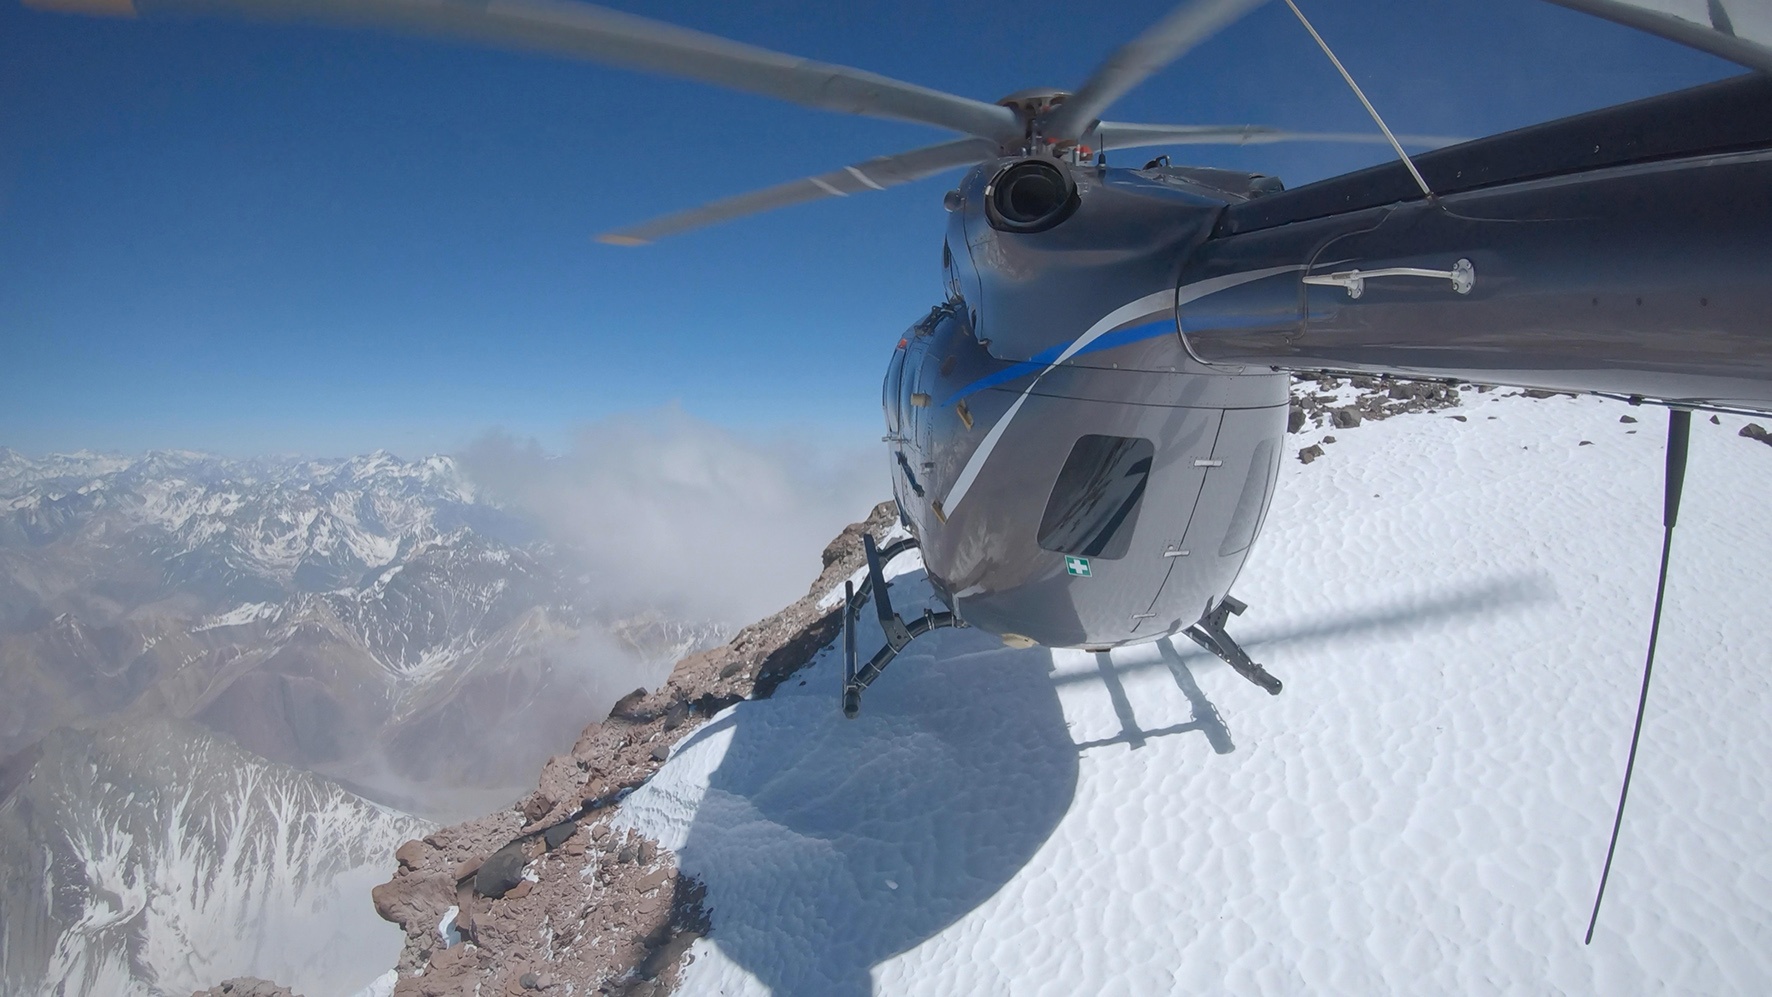 Emergency Live | The new Airbus H145 climb the Aconcagua mountain, 6,962m a.l.s.